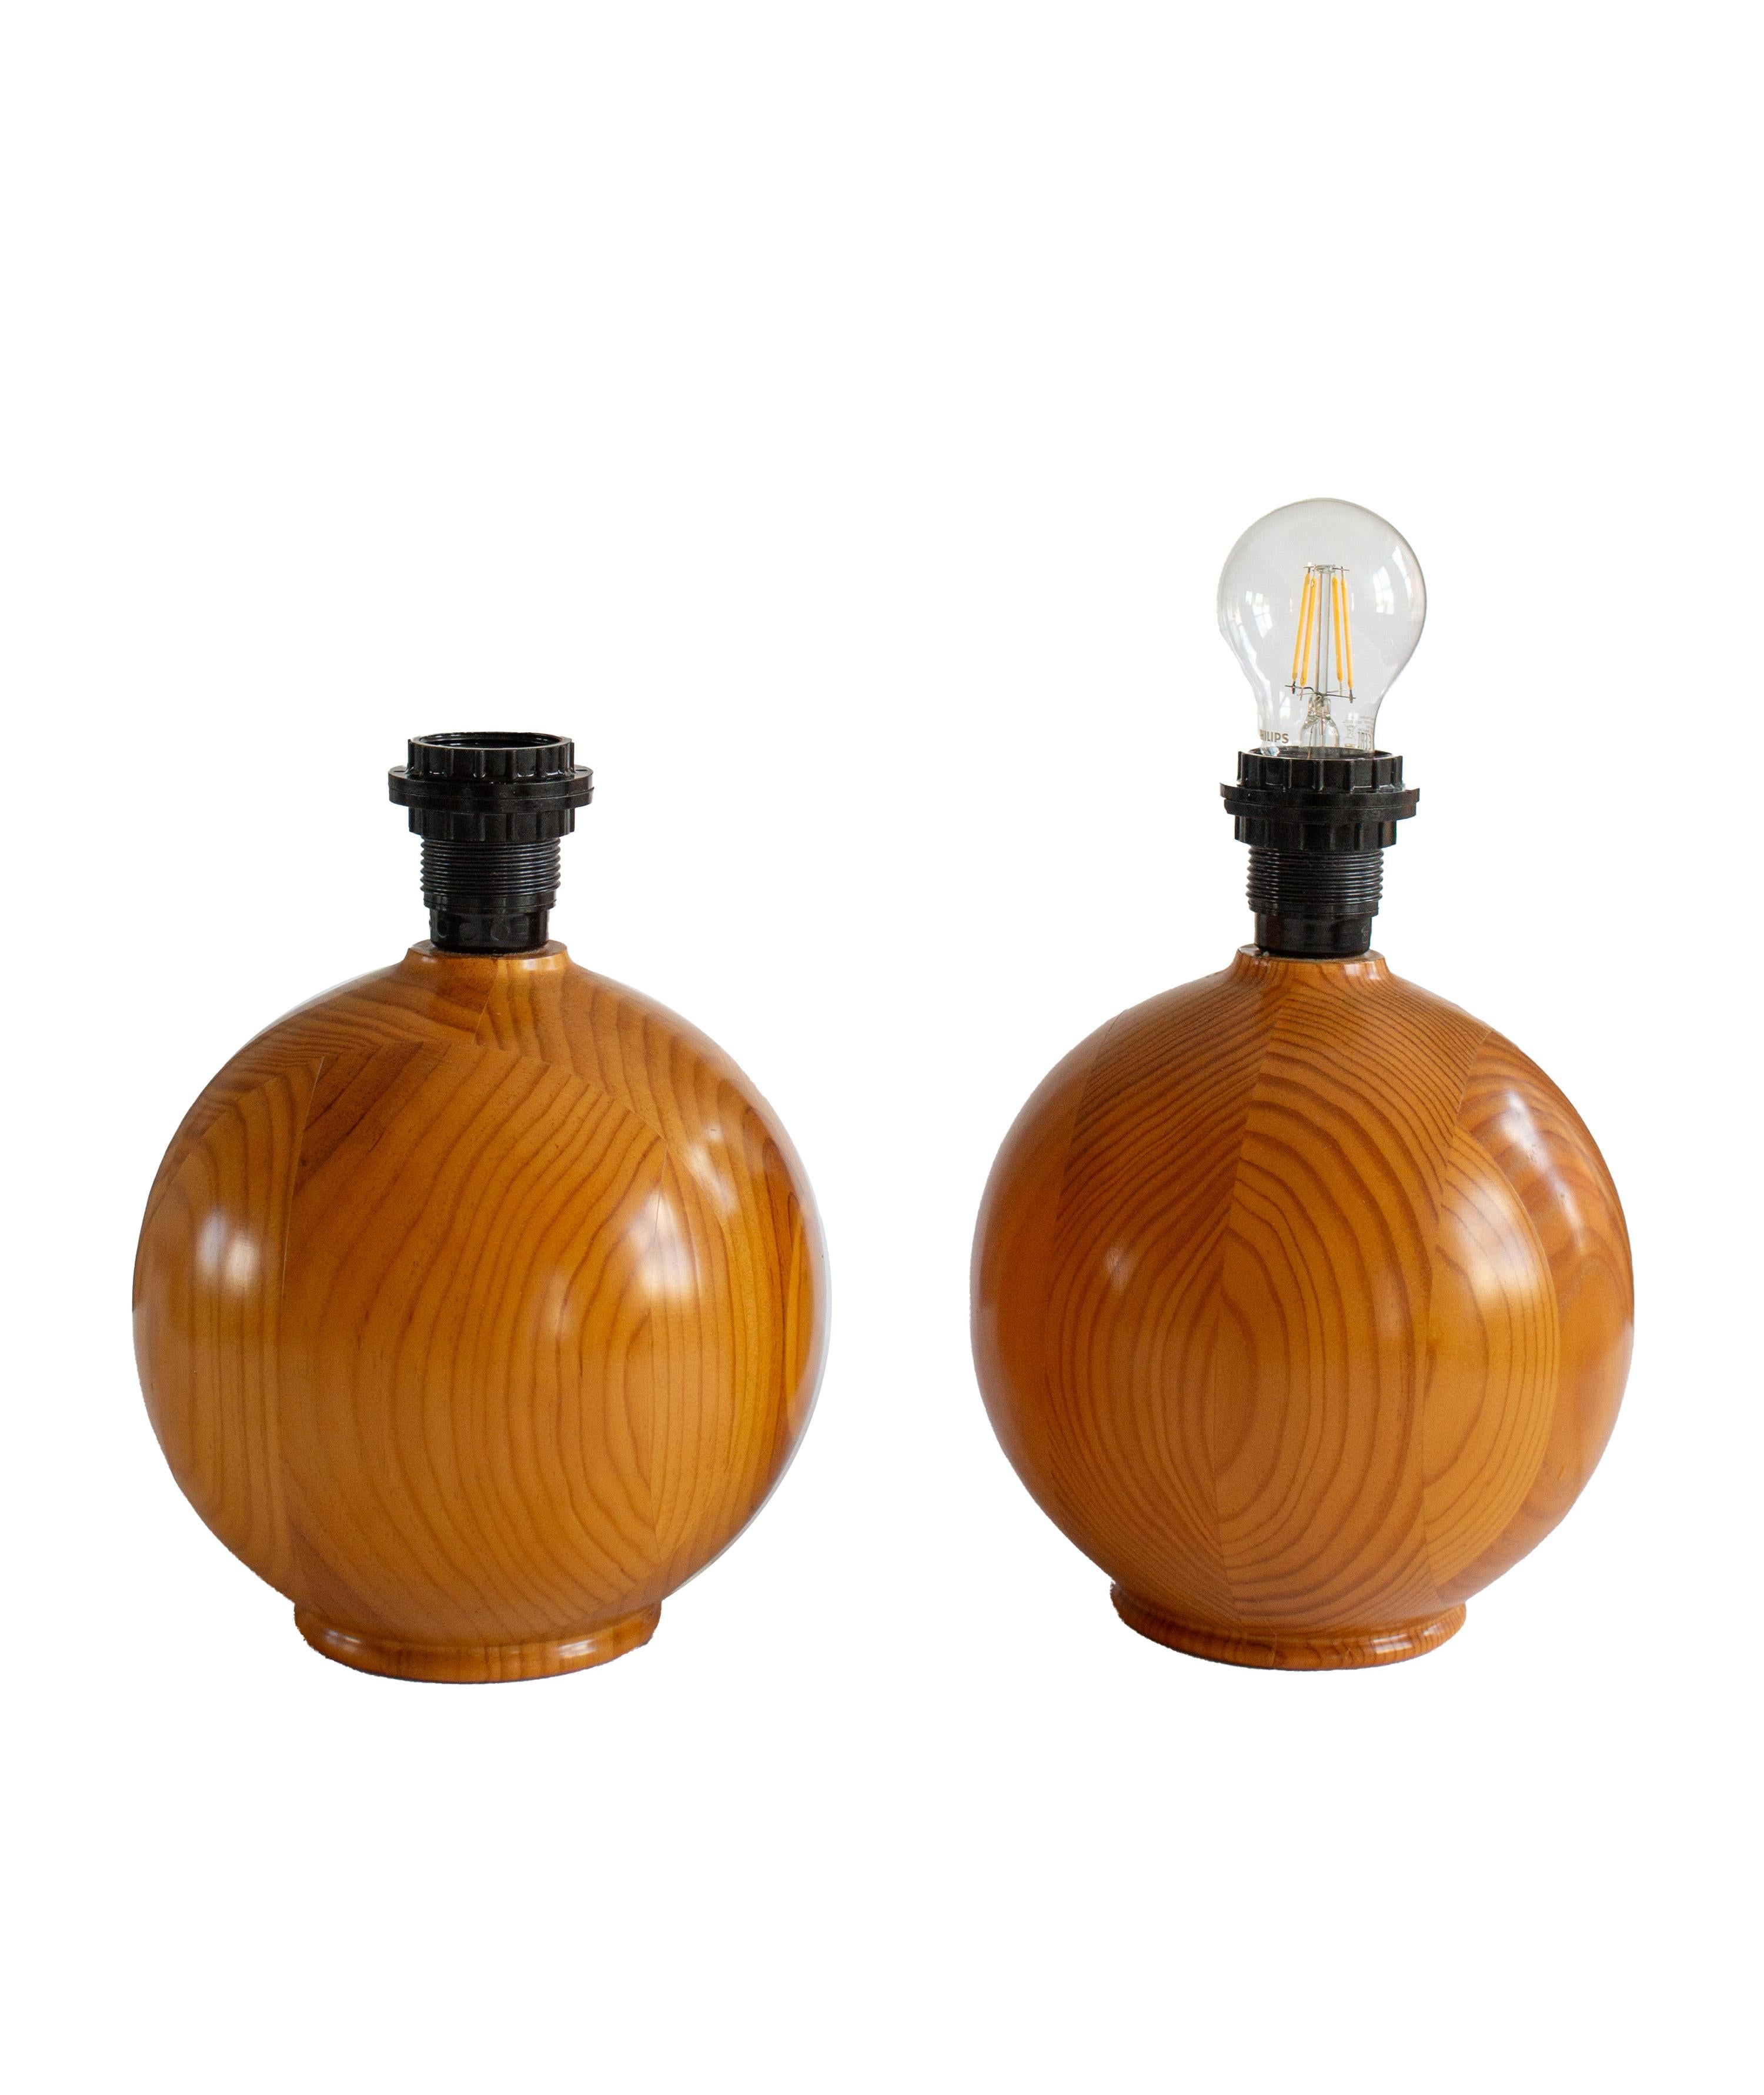 Scandinavian Modern A Pair of Round Designer Table Lamps in Solid Pine from Sweden, 1970s